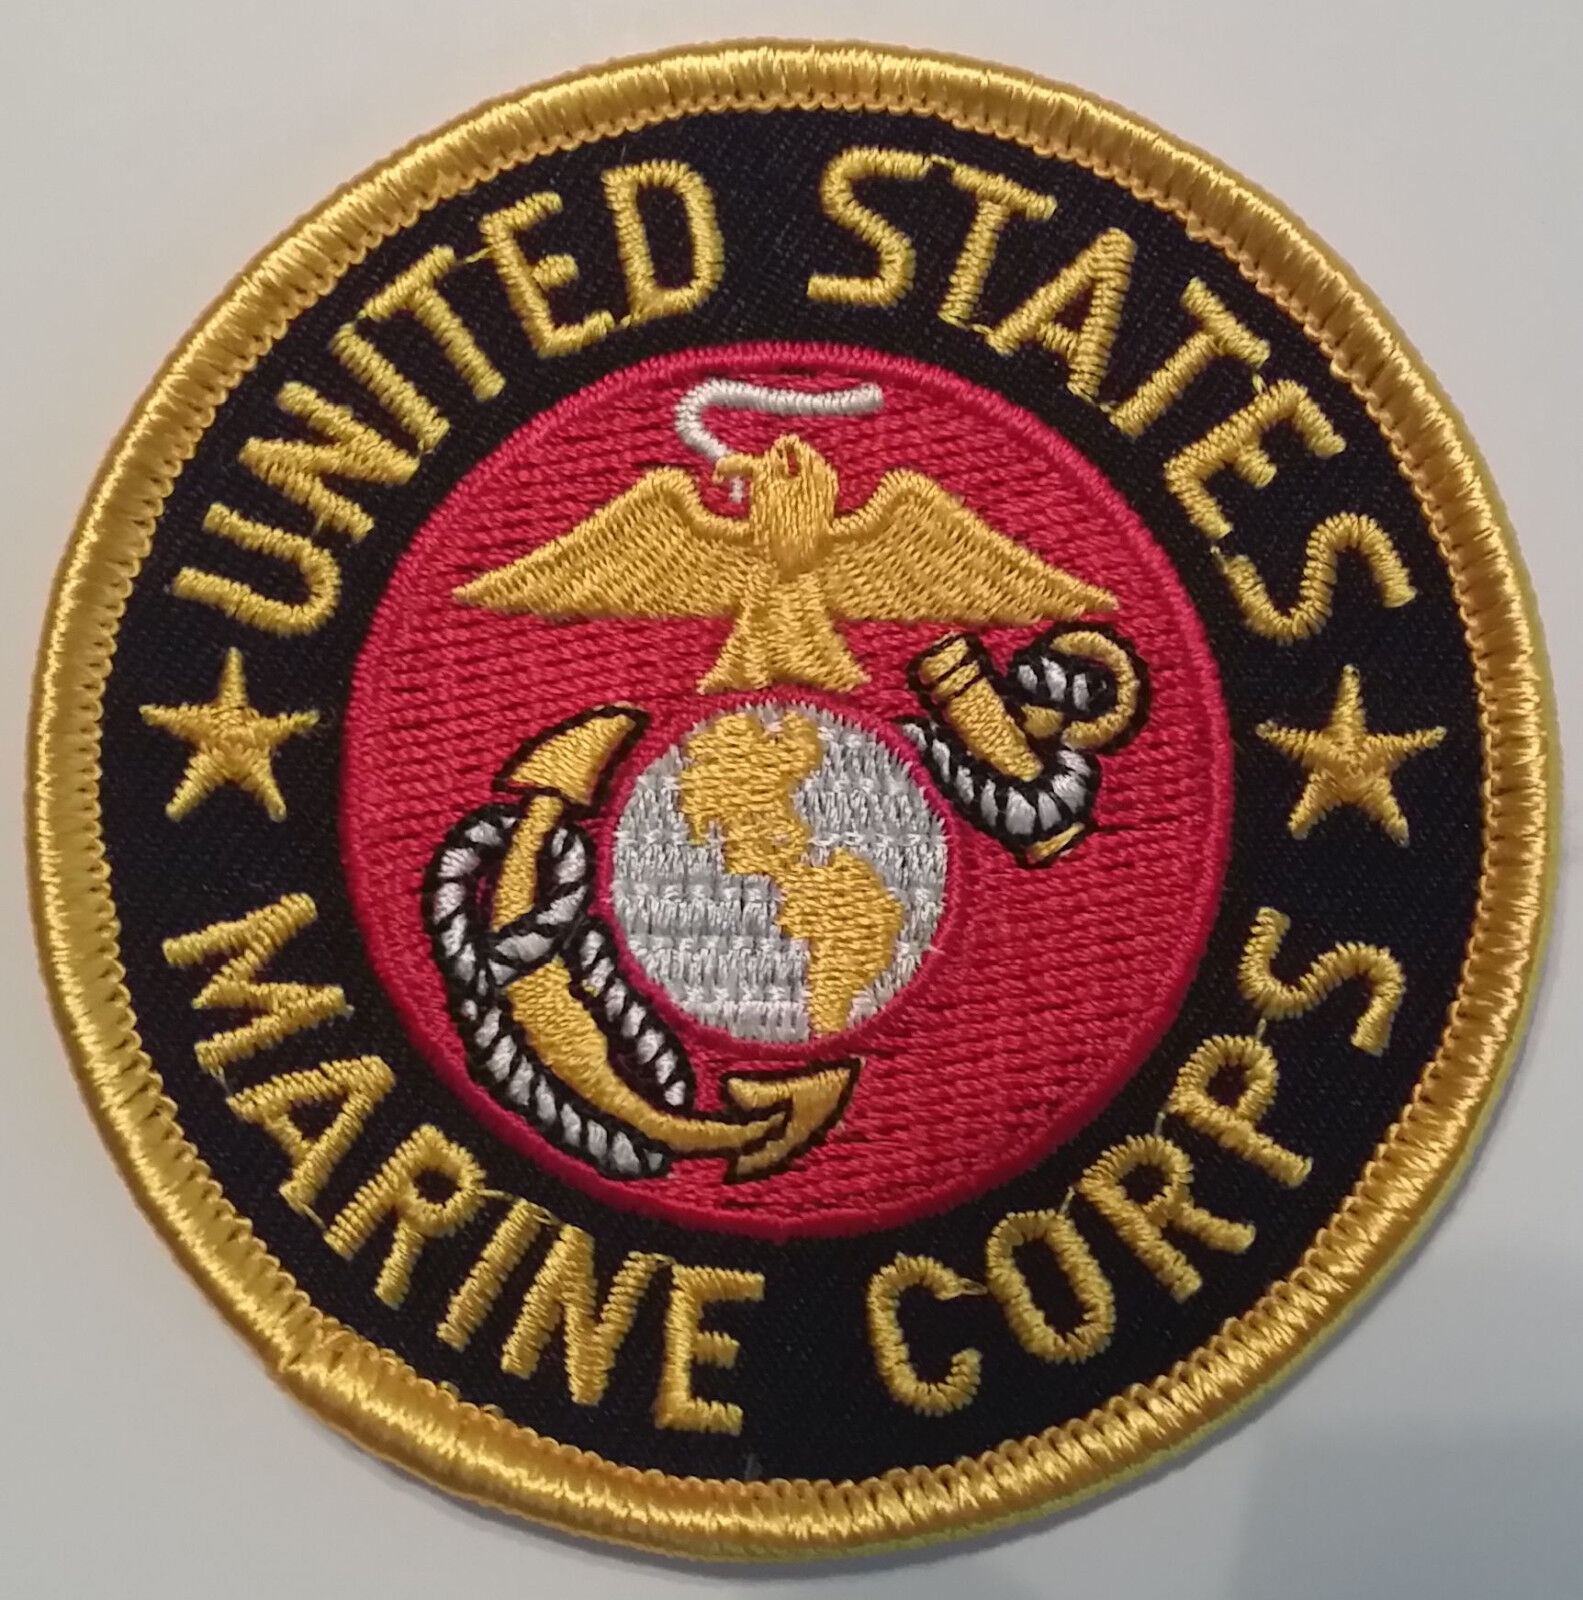 US MARINE CORPS USMC 3 INCH ROUND PATCH - MADE IN THE USA